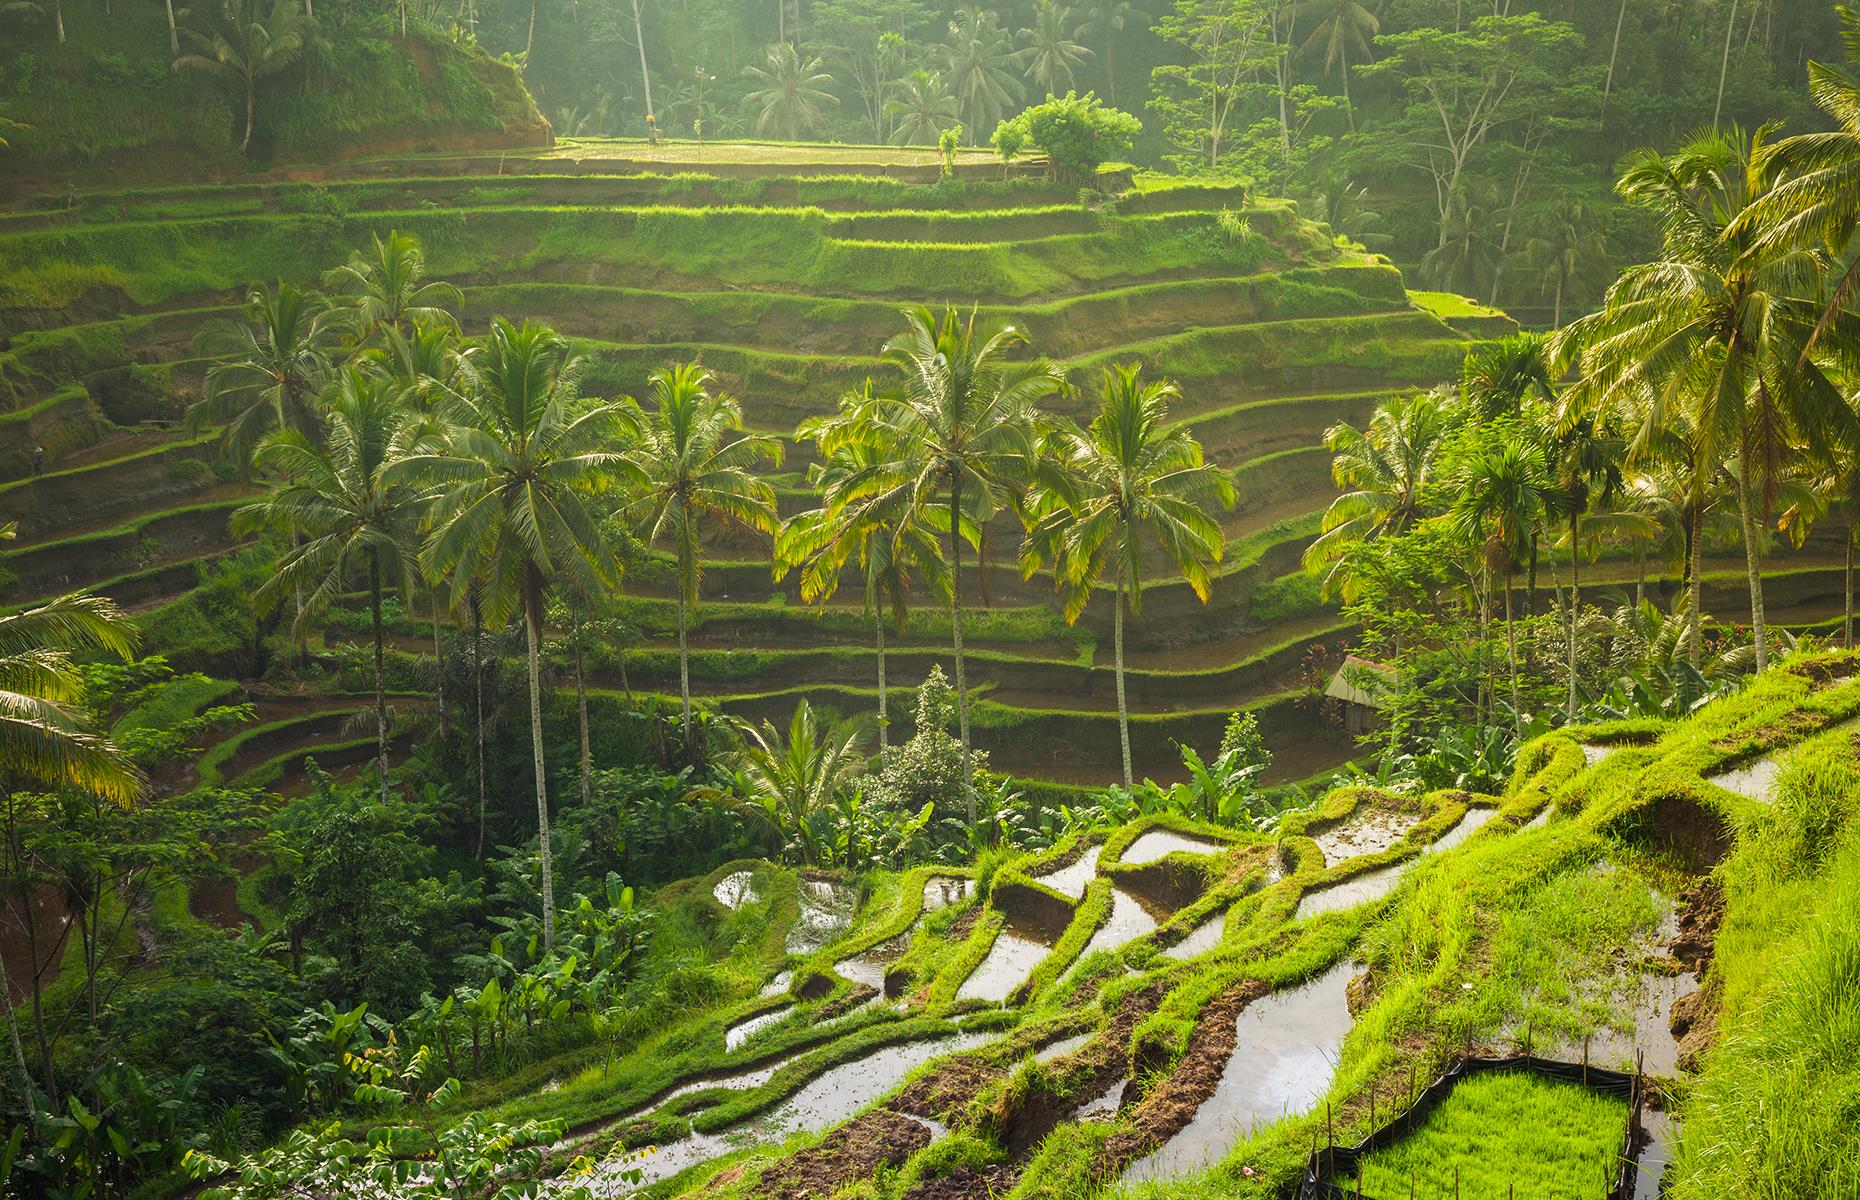 <p>A must-have experience in Bali, visiting the Tegalalang Rice Terraces feels like traveling back in time. One of the most visited attractions on the Indonesian island, the lush green rice fields can get quite busy during the day but go early in the morning and you'll have this UNESCO World Heritage Site all to yourself.</p>